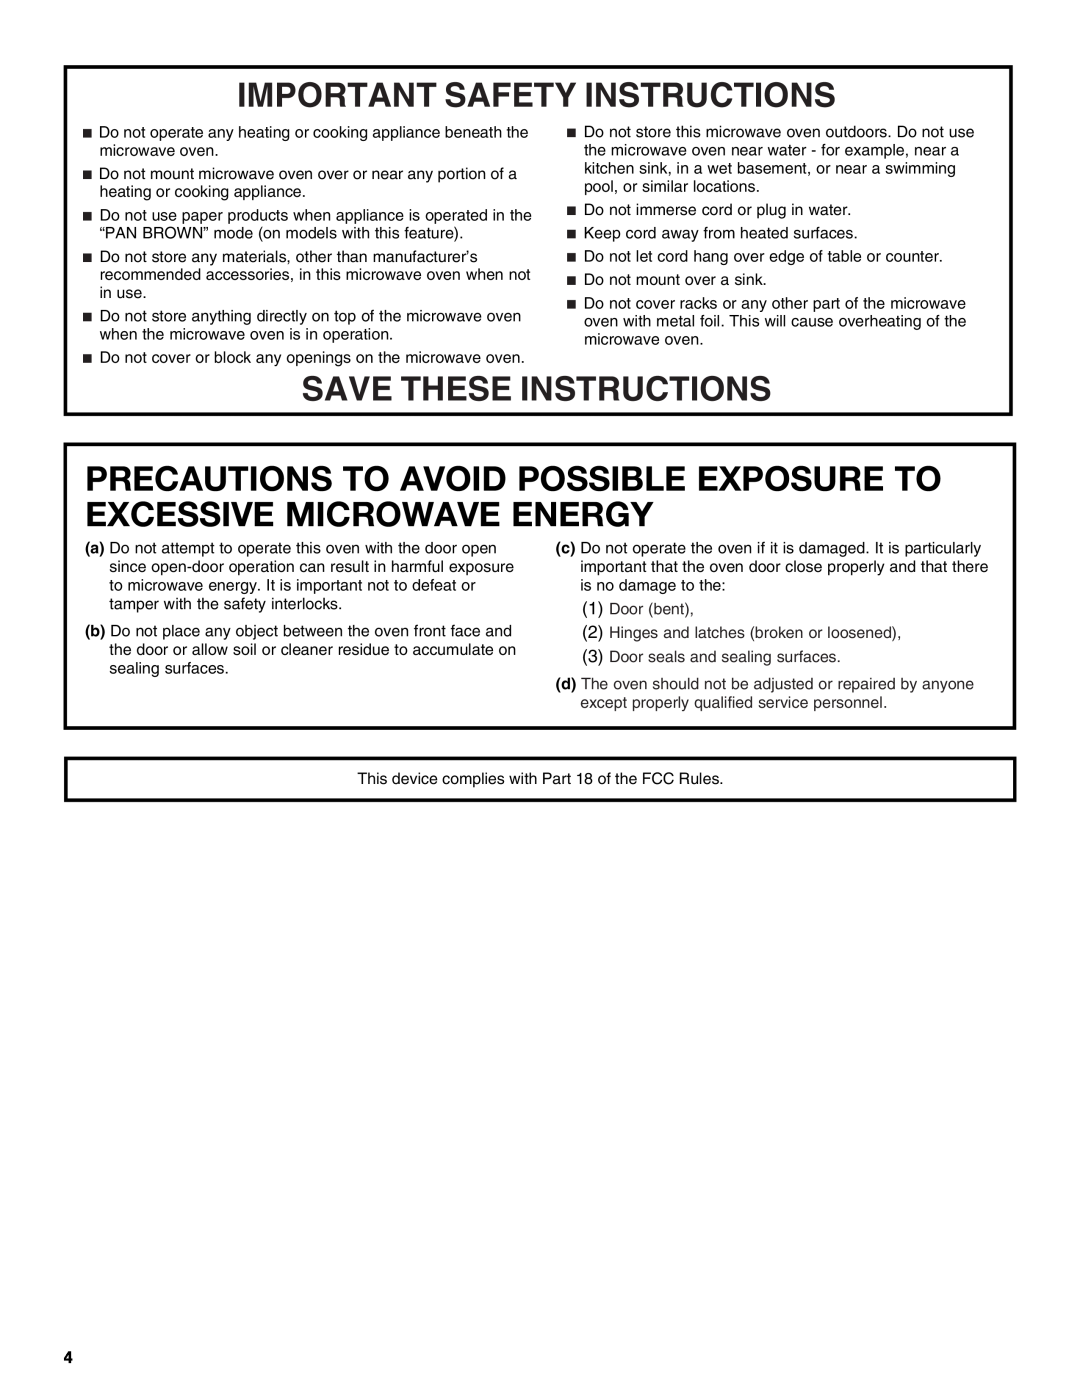 KitchenAid KCMS2055SSS Precautions To Avoid Possible Exposure To Excessive Microwave Energy, Important Safety Instructions 